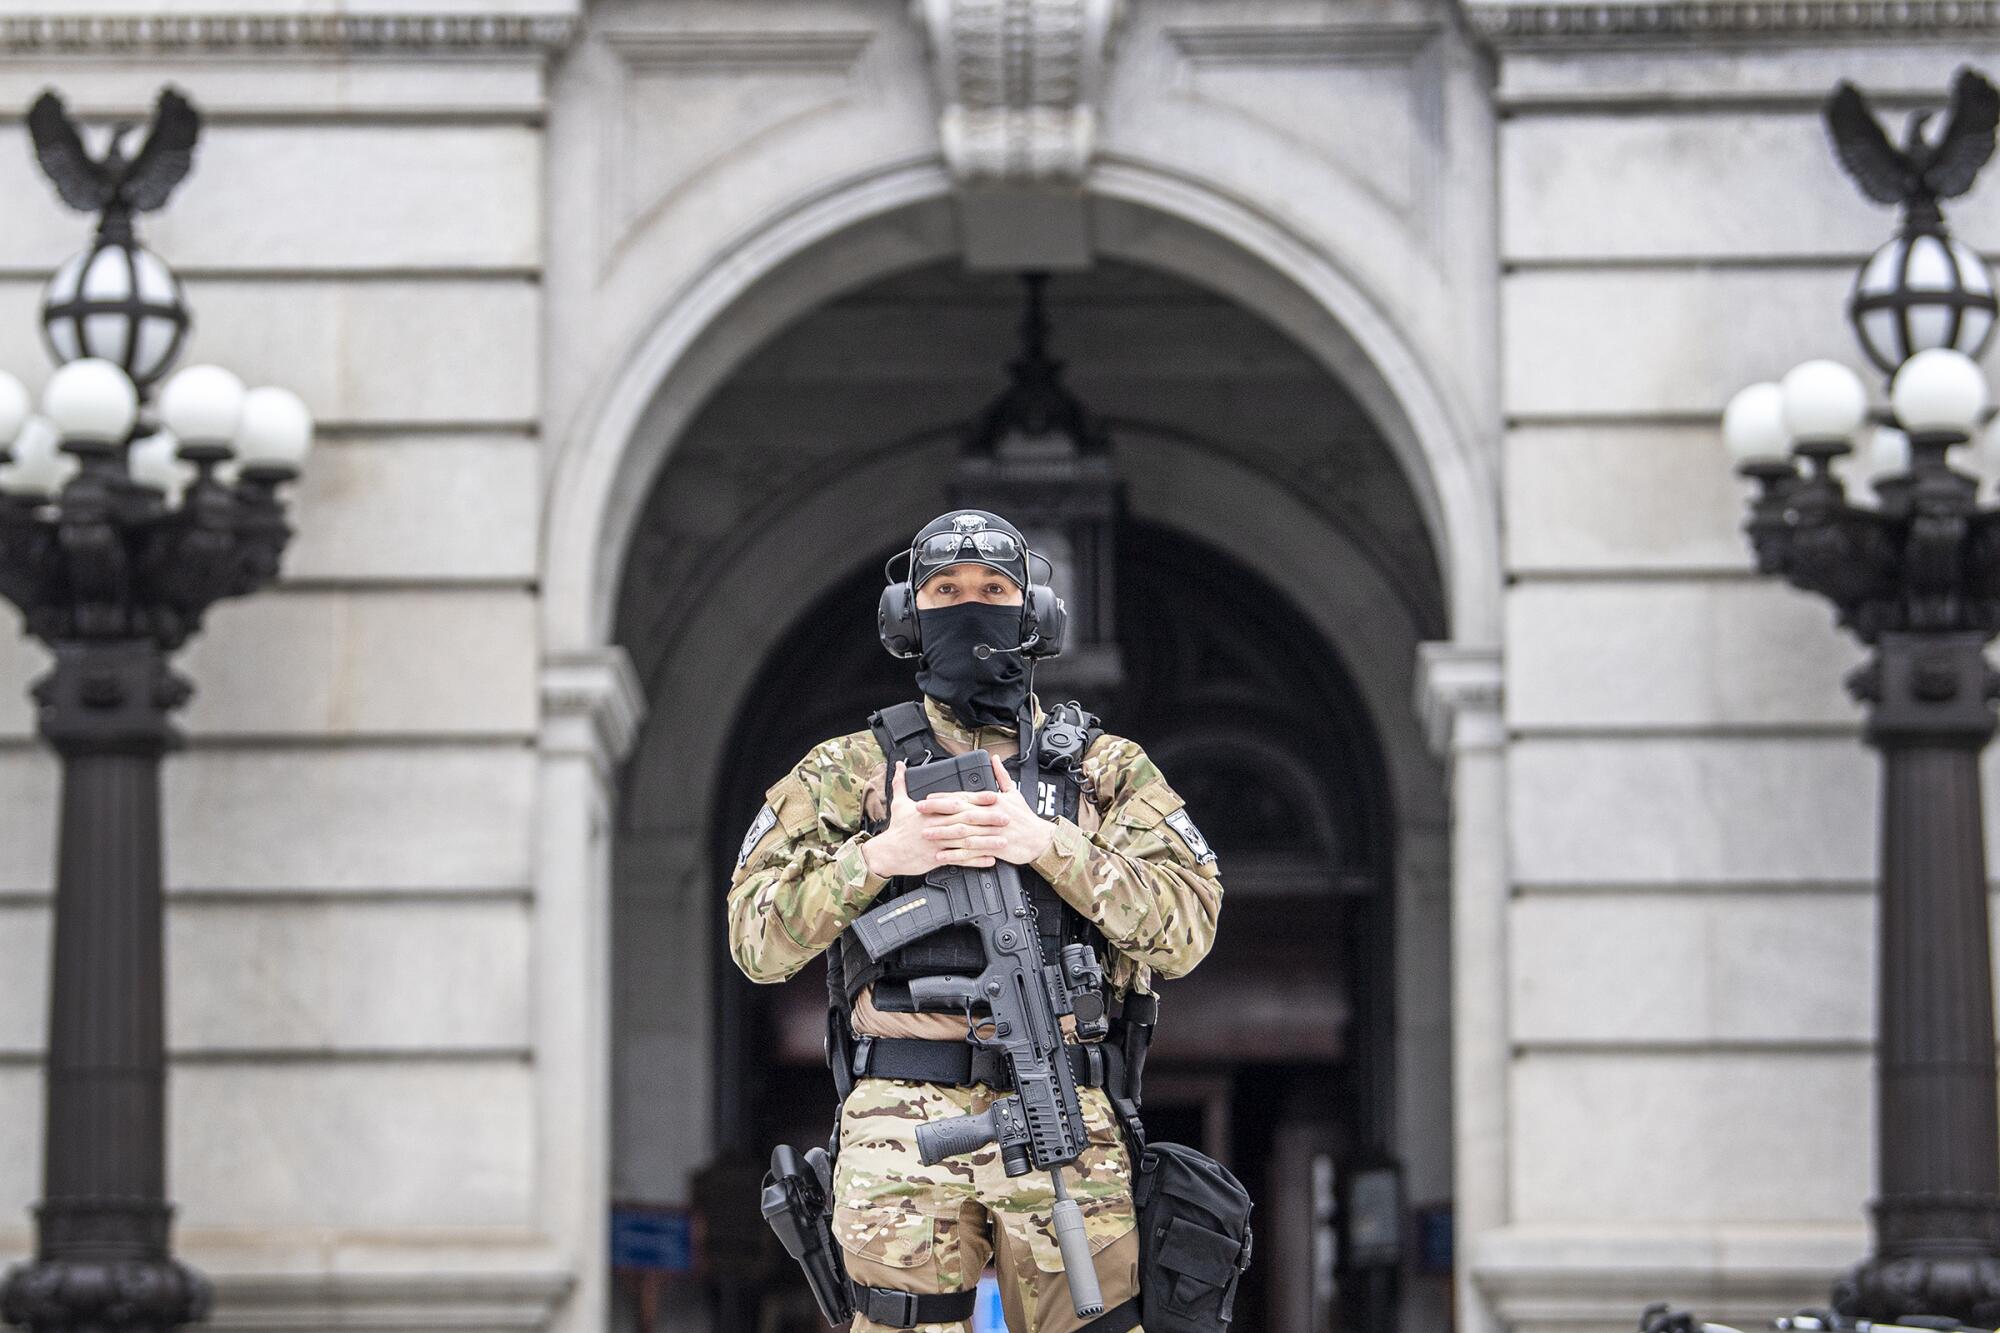 A member of the Pennsylvania Capitol Police guards the entrance to the Pennsylvania Capitol Complex in Harrisburg.